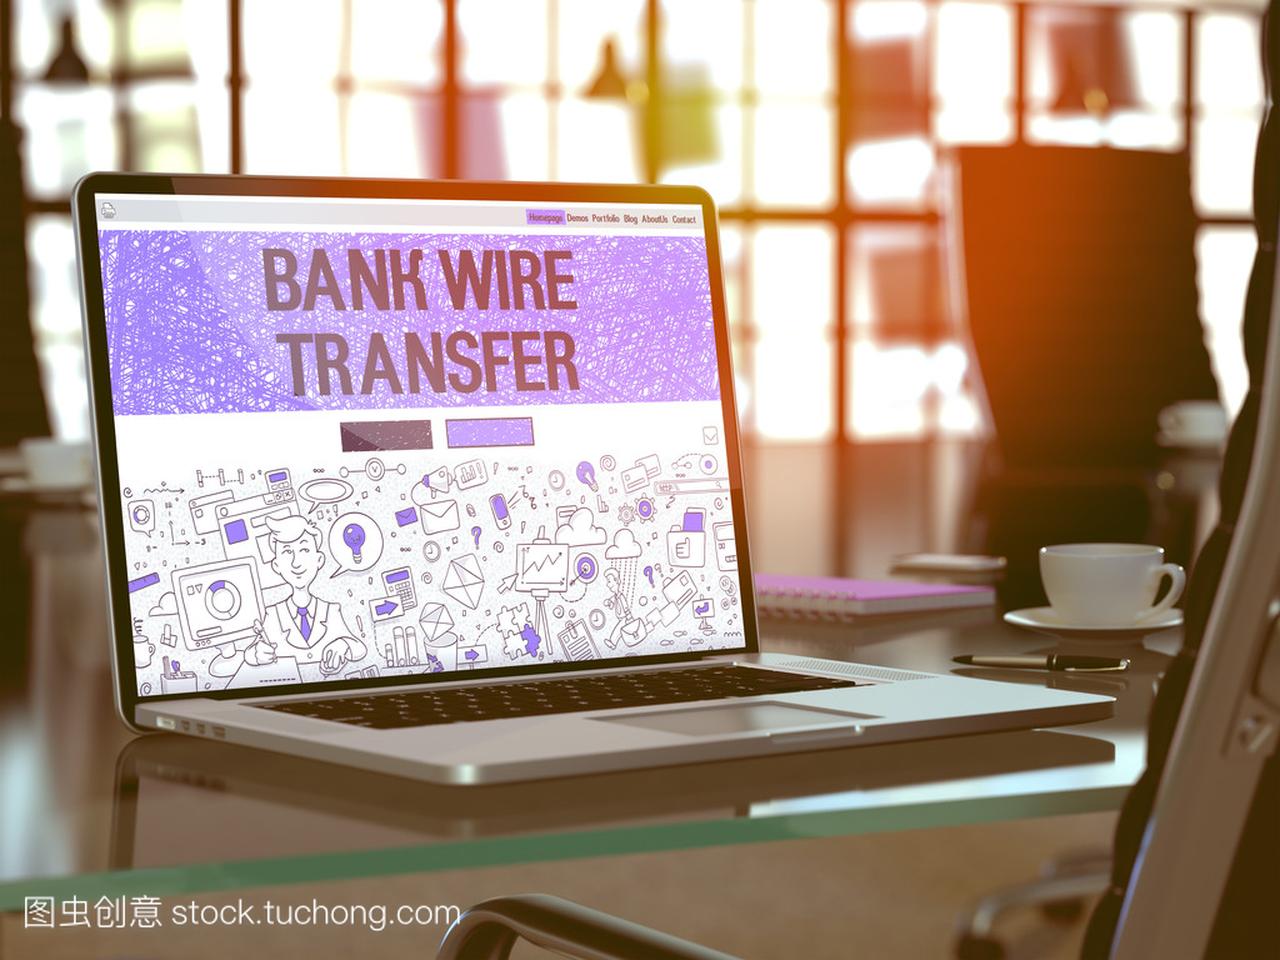 Bank Wire Transfer - Concept on Laptop Scree